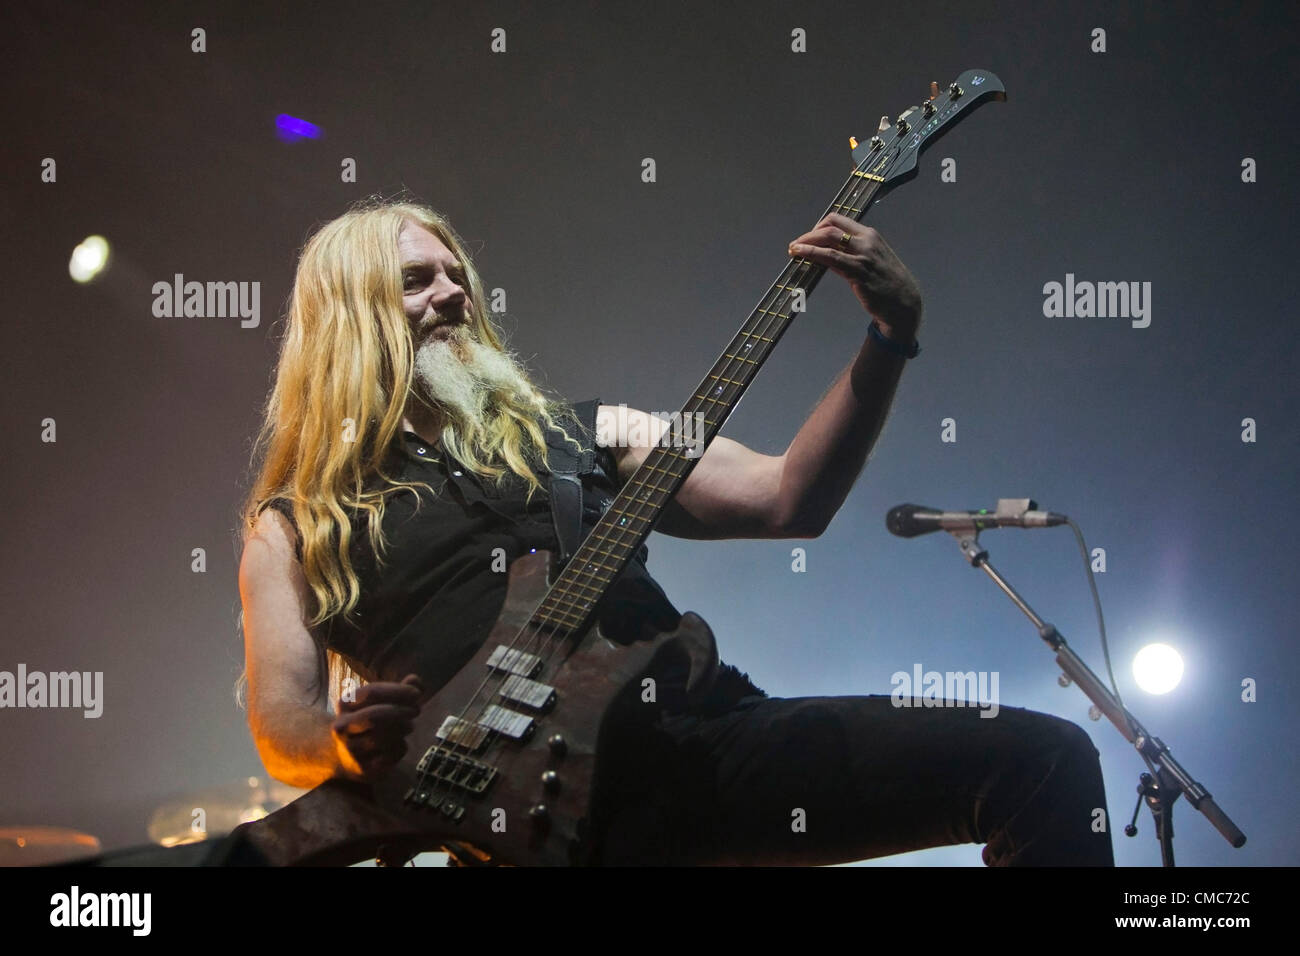 Marco Hietala of group Nightwish from Finland performs during the International music festival Masters of Rock in Vizovice, Czech Republic, on Sunday, July 15, 2012. (CTK Photo/Josef Omelka) Stock Photo